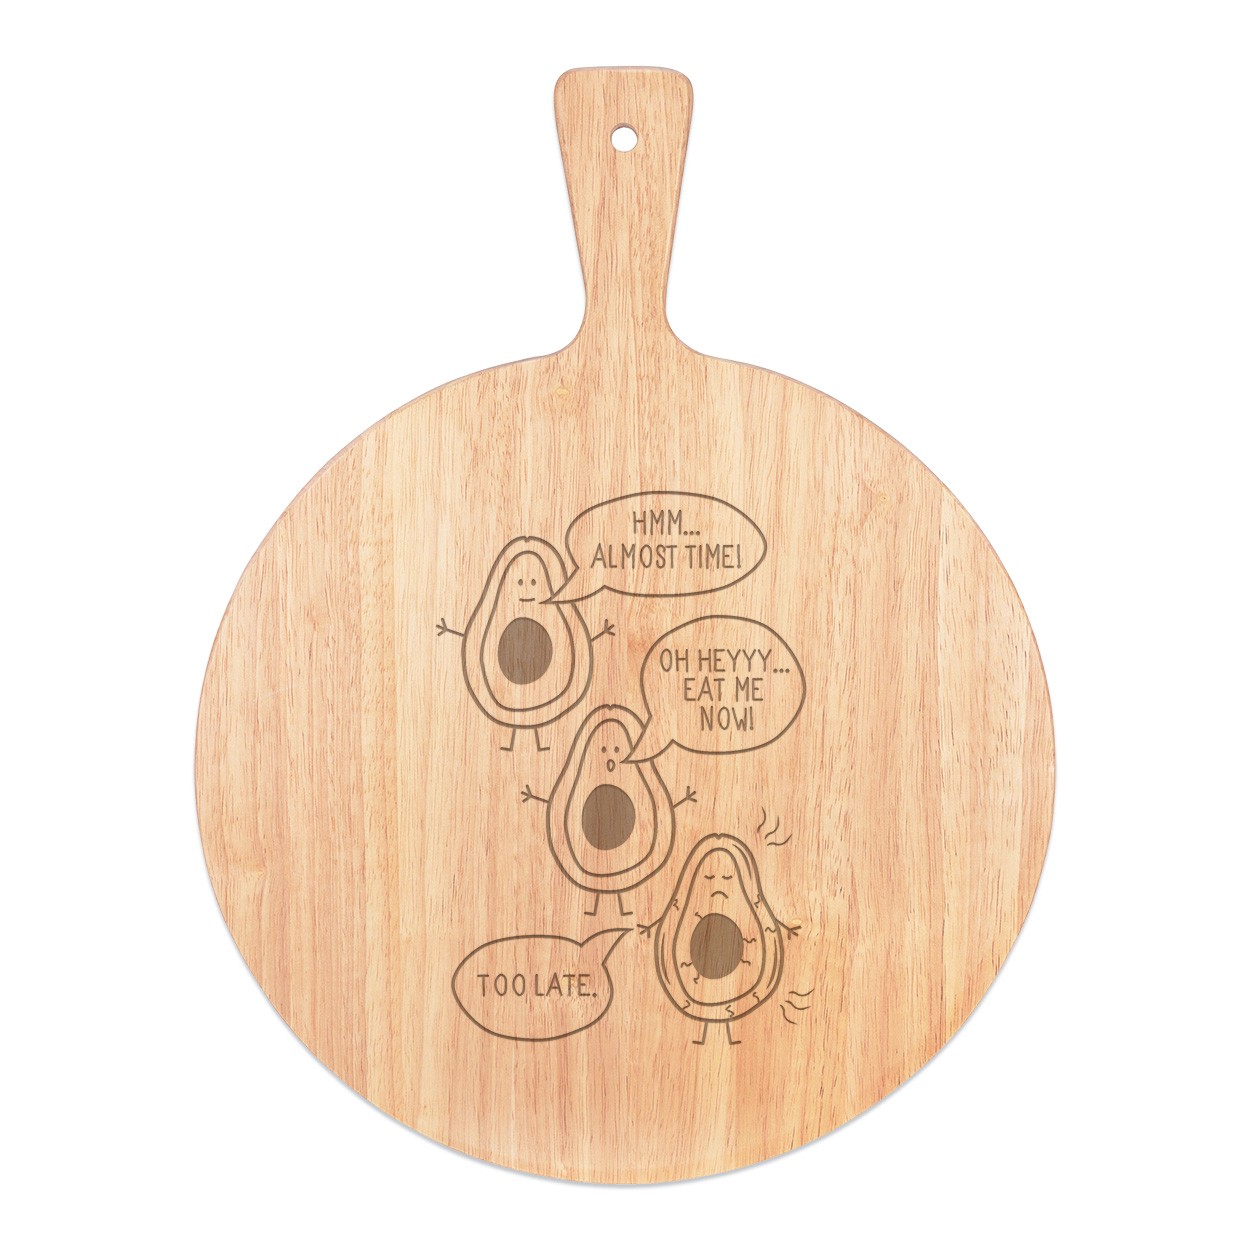 Avocado Eat Me Now Too Late Pizza Board Paddle Serving Tray Handle Round Wooden 45x34cm